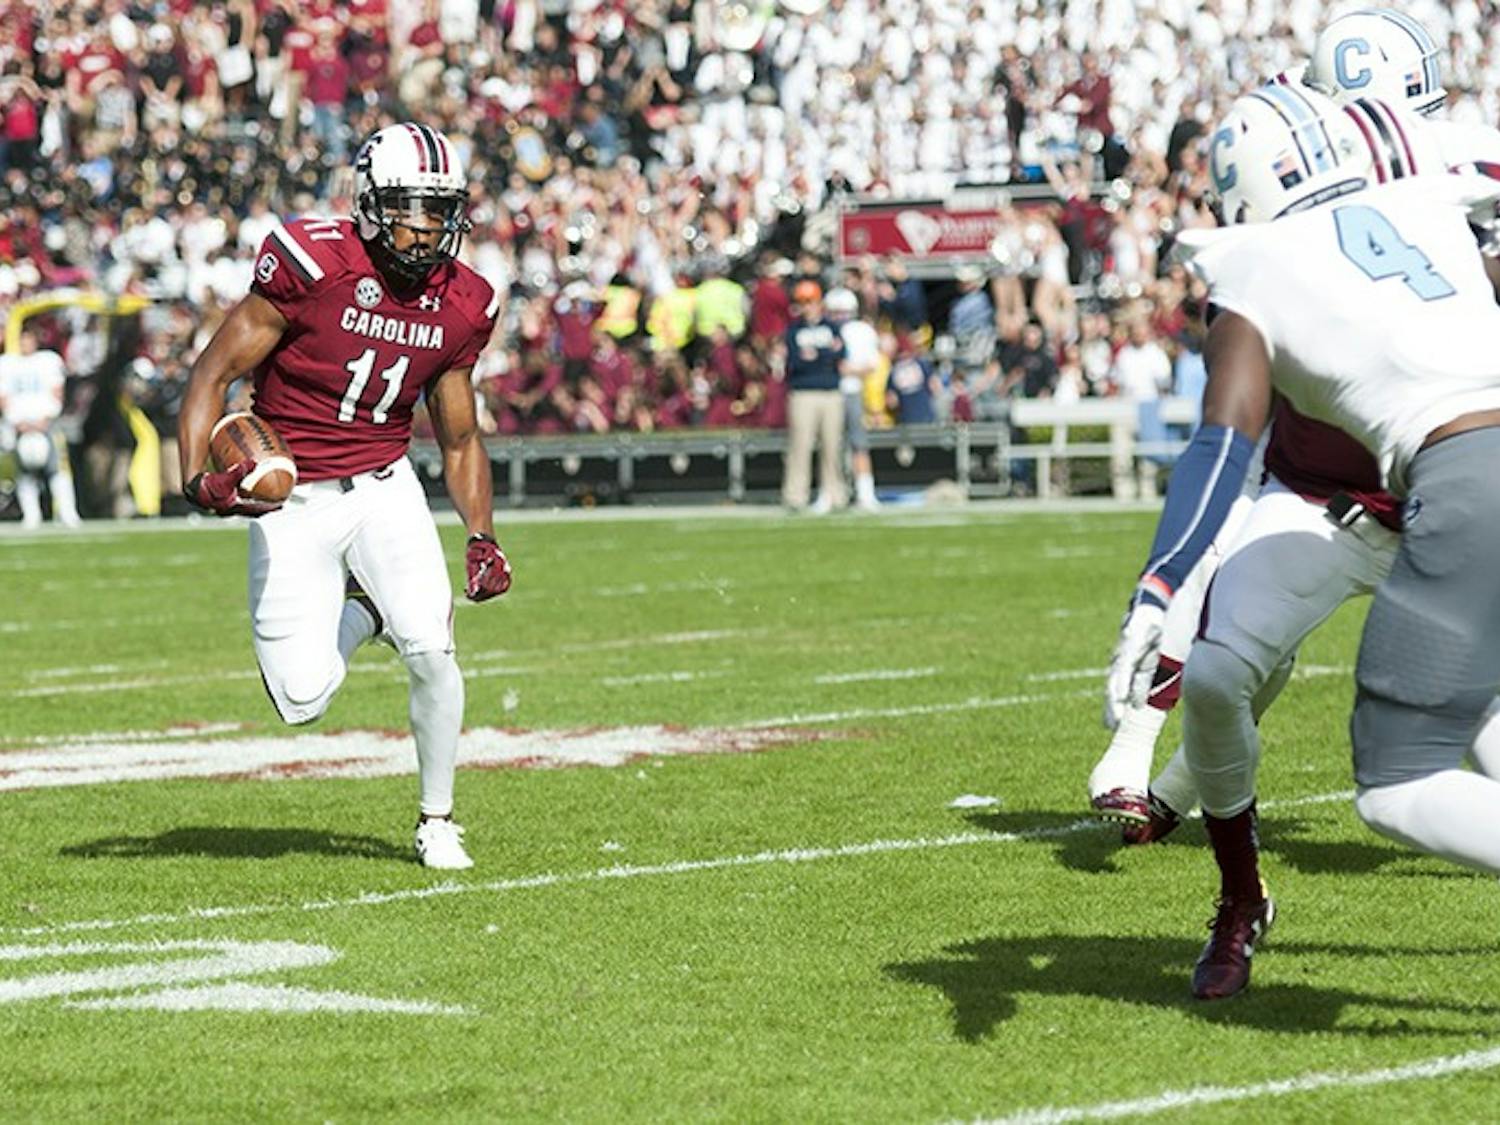 The loss to the Citadel snapped the 22 win streak South Carolina had against non-conference teams.